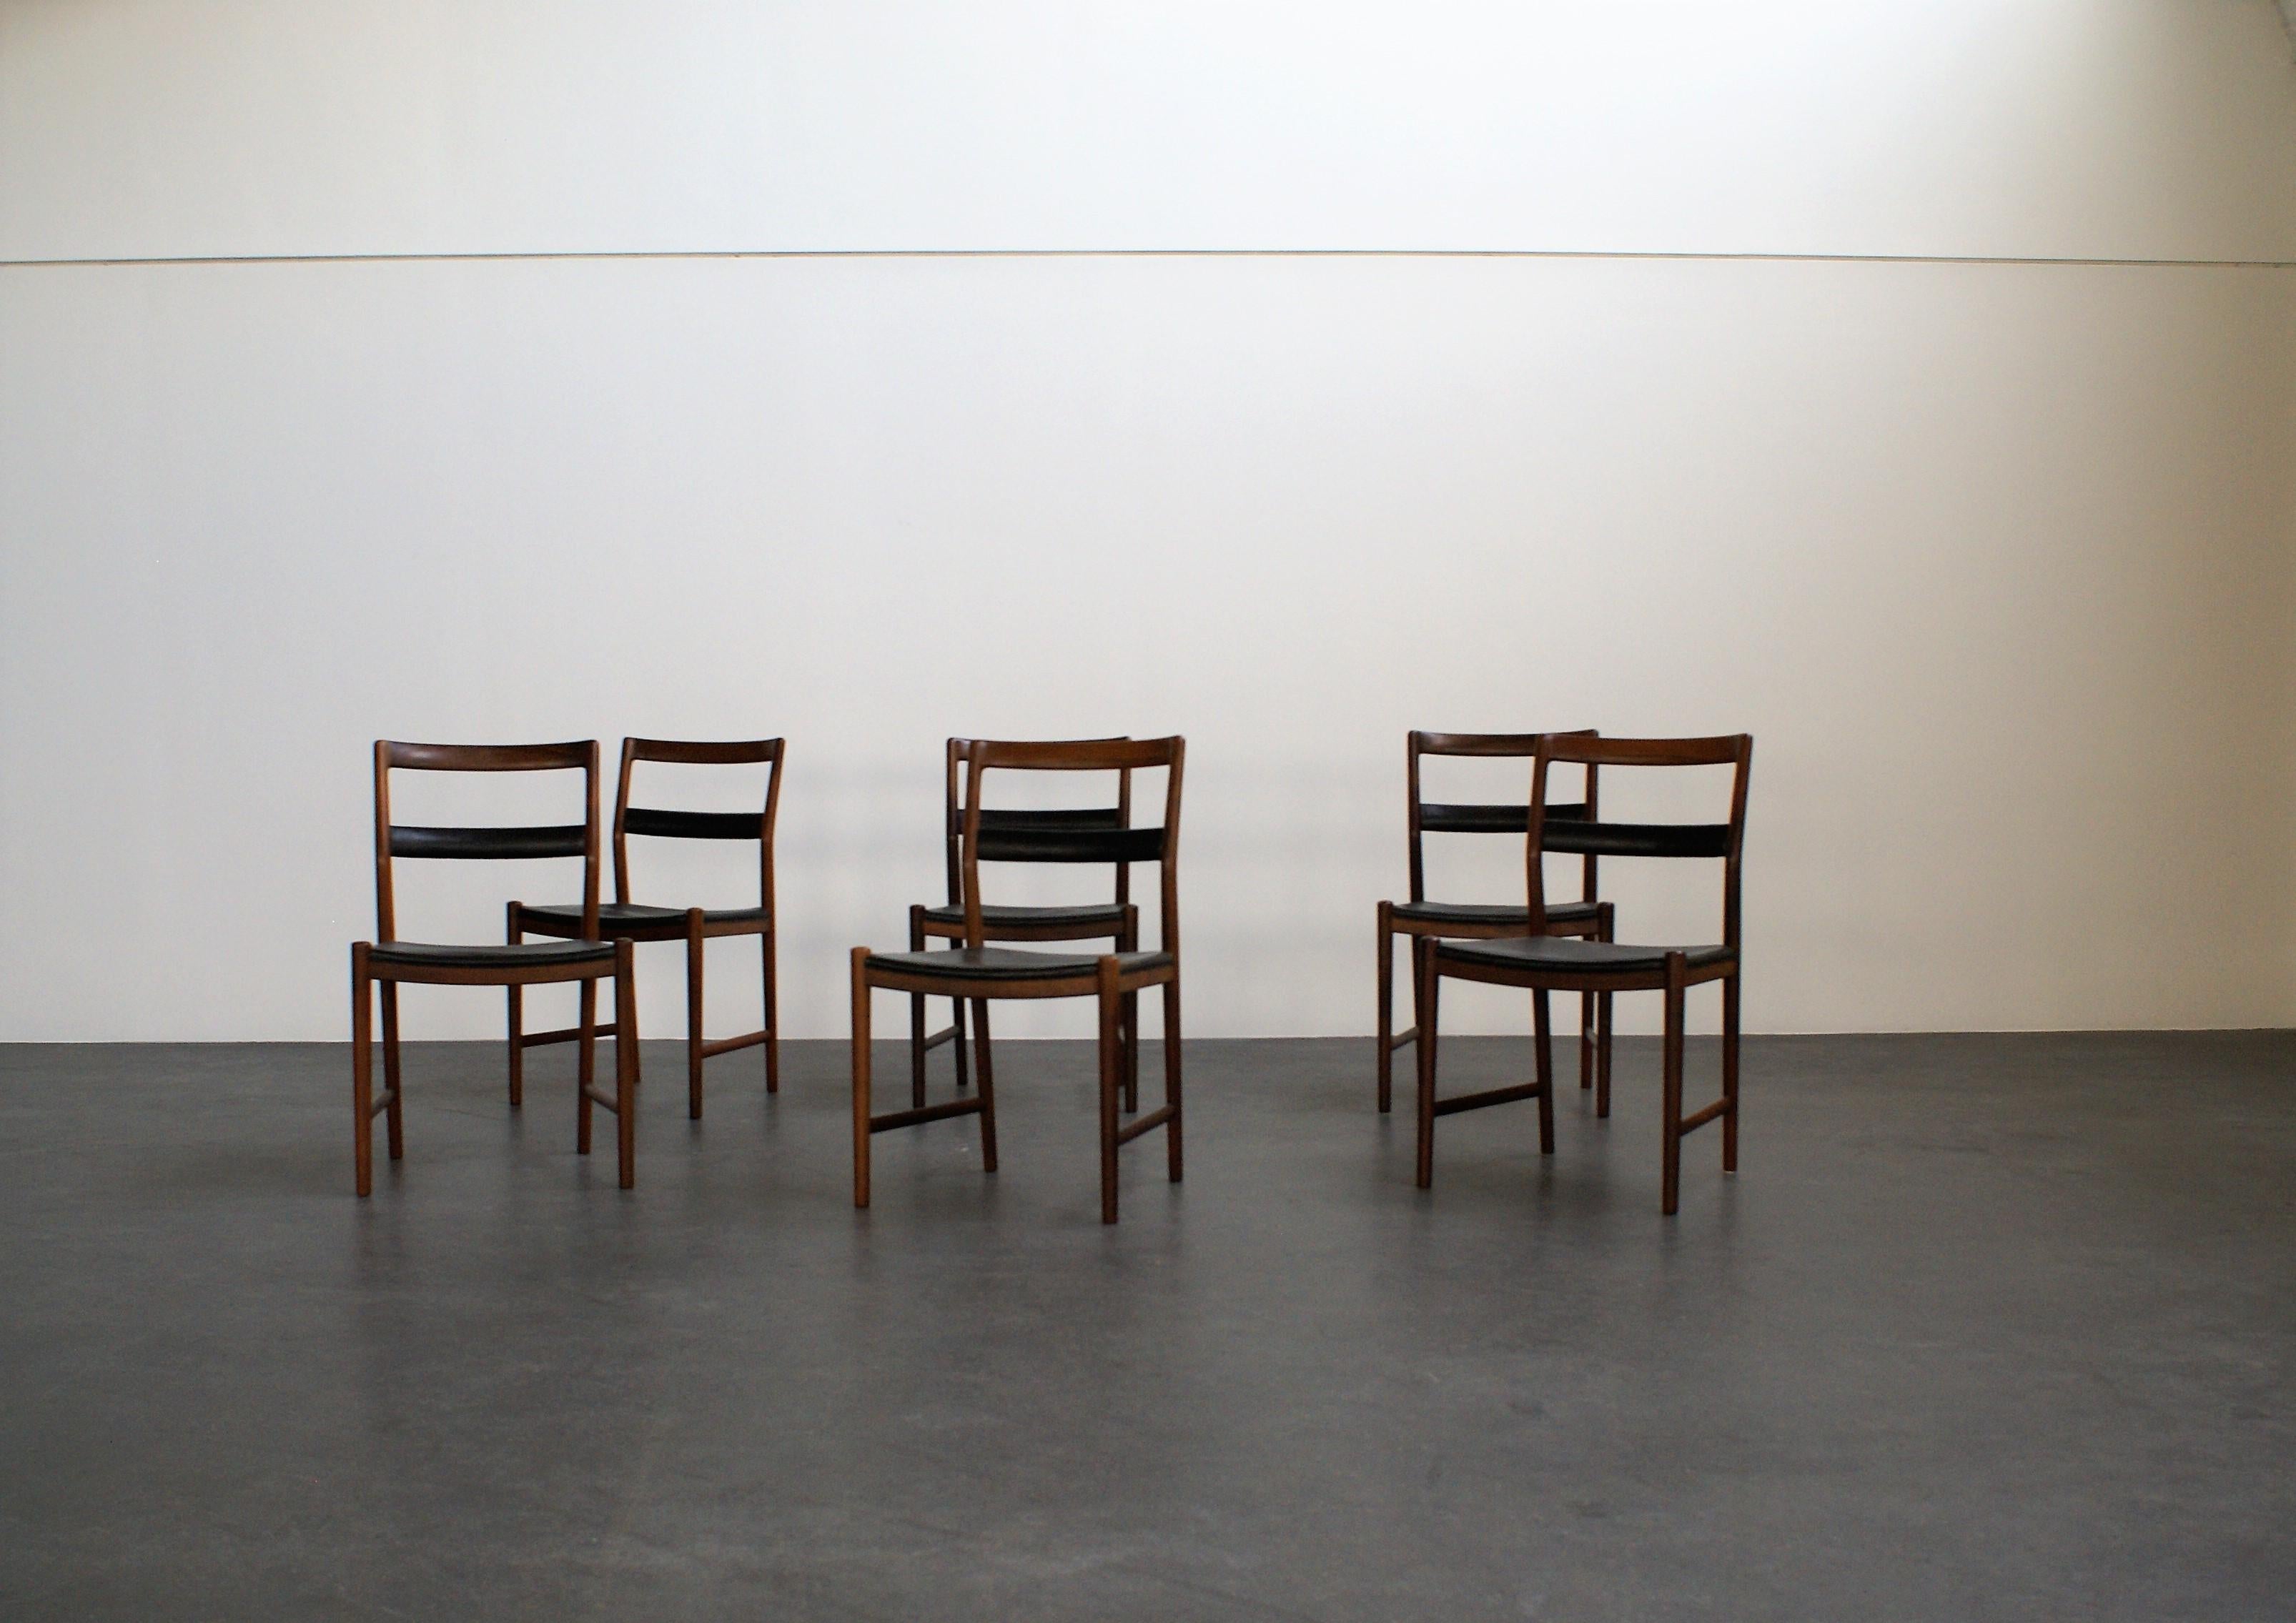 Set of six dining chairs designed by Helge Vestergaard-Jensen and executed by master cabinetmaker Søren Horn, marked from maker. Upholstery in original patinated black leather.

This model was presented at The Copenhagen Cabinetmakers' Guild